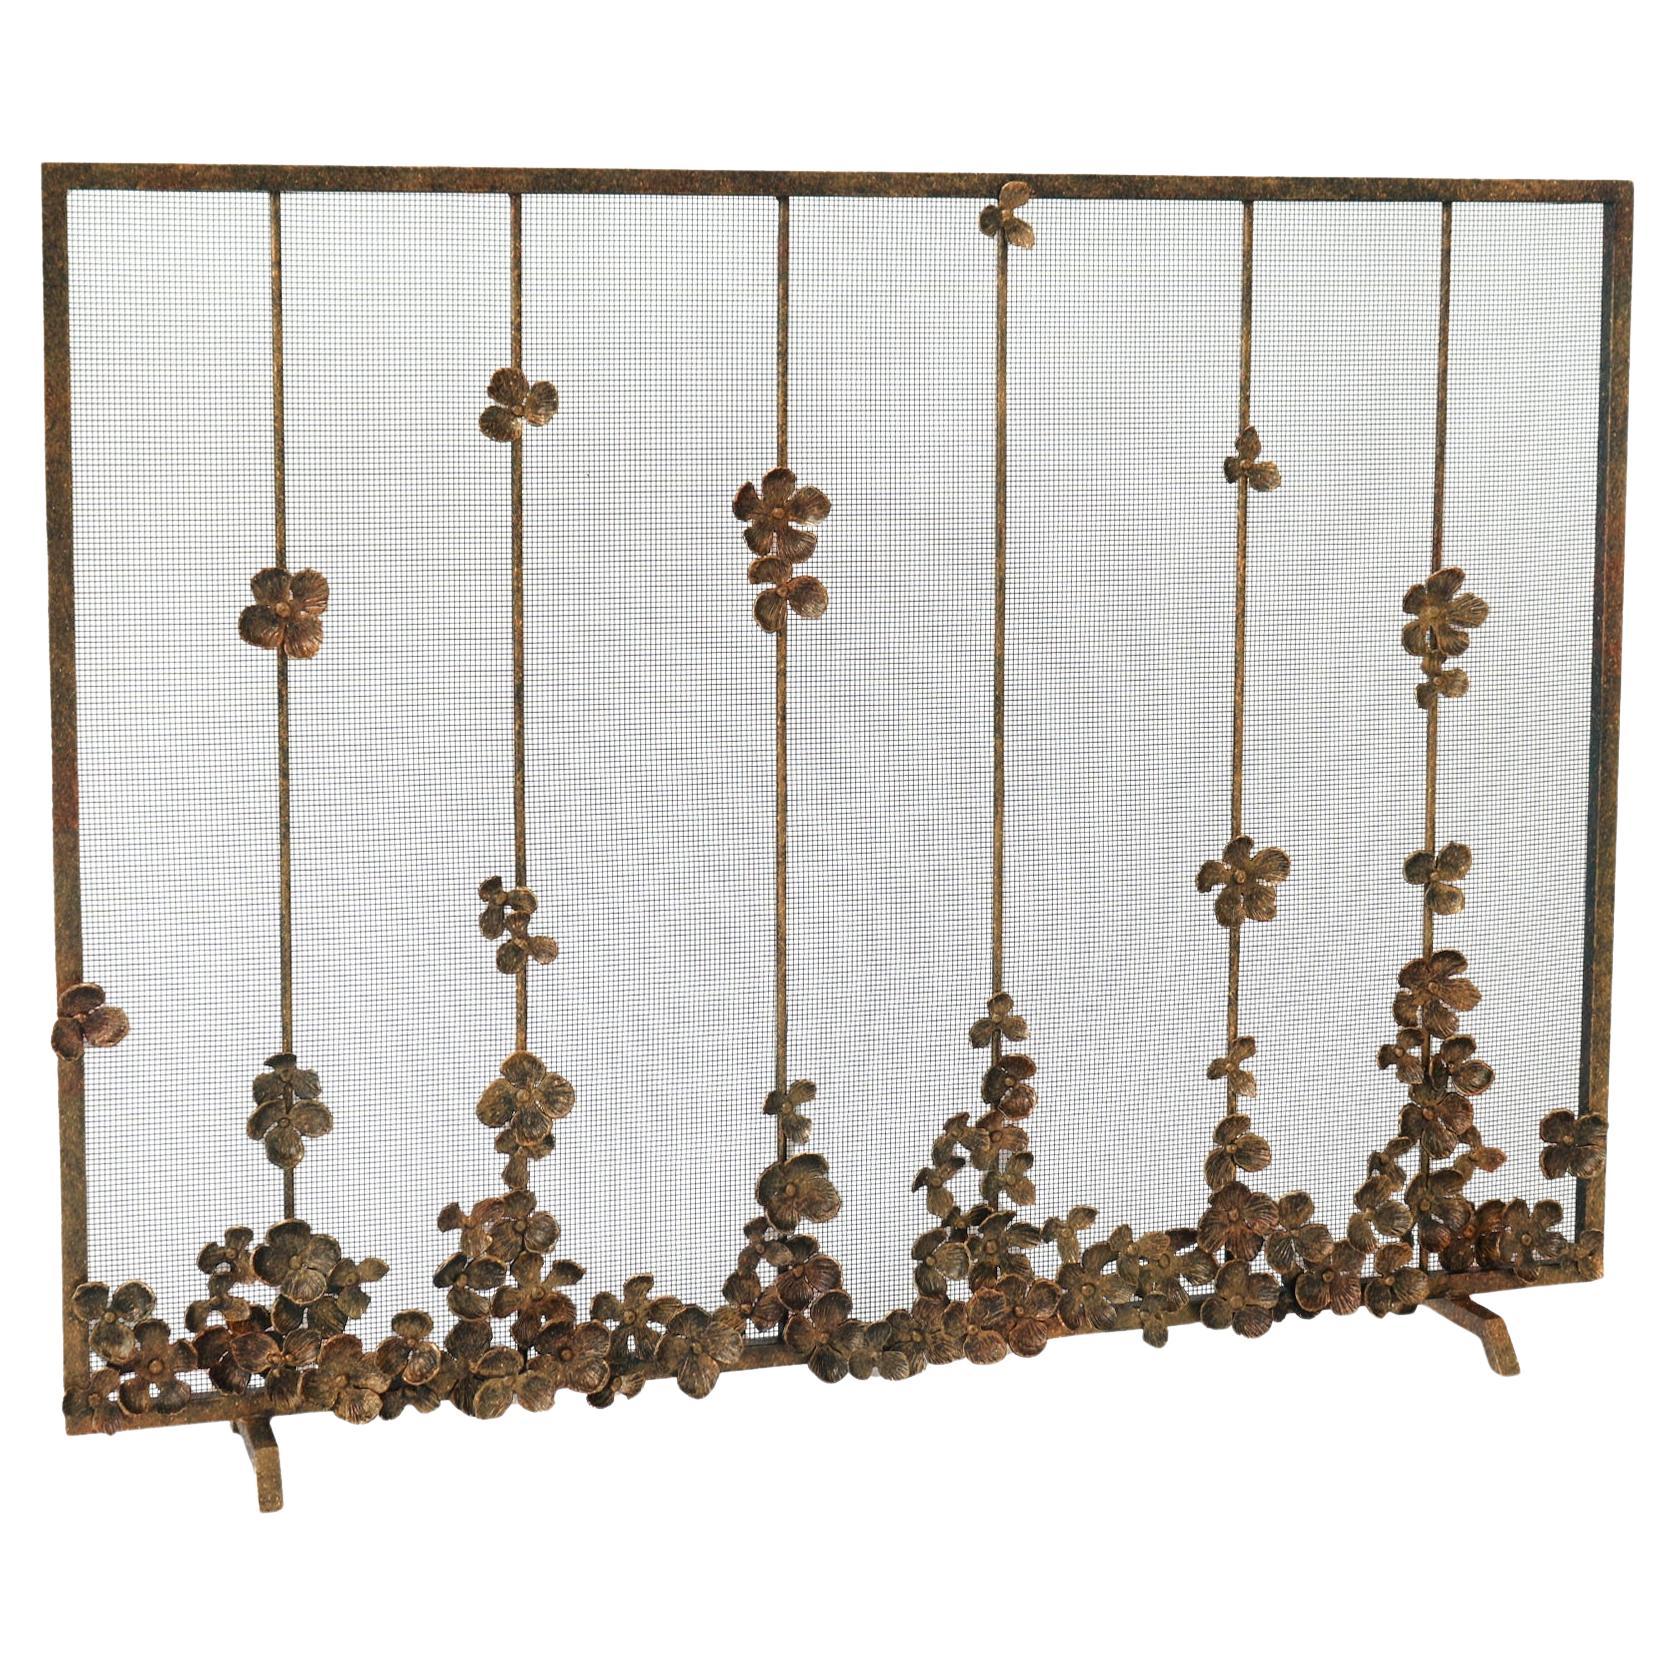 Cascading Blooms Fireplace Screen in Tobacco 